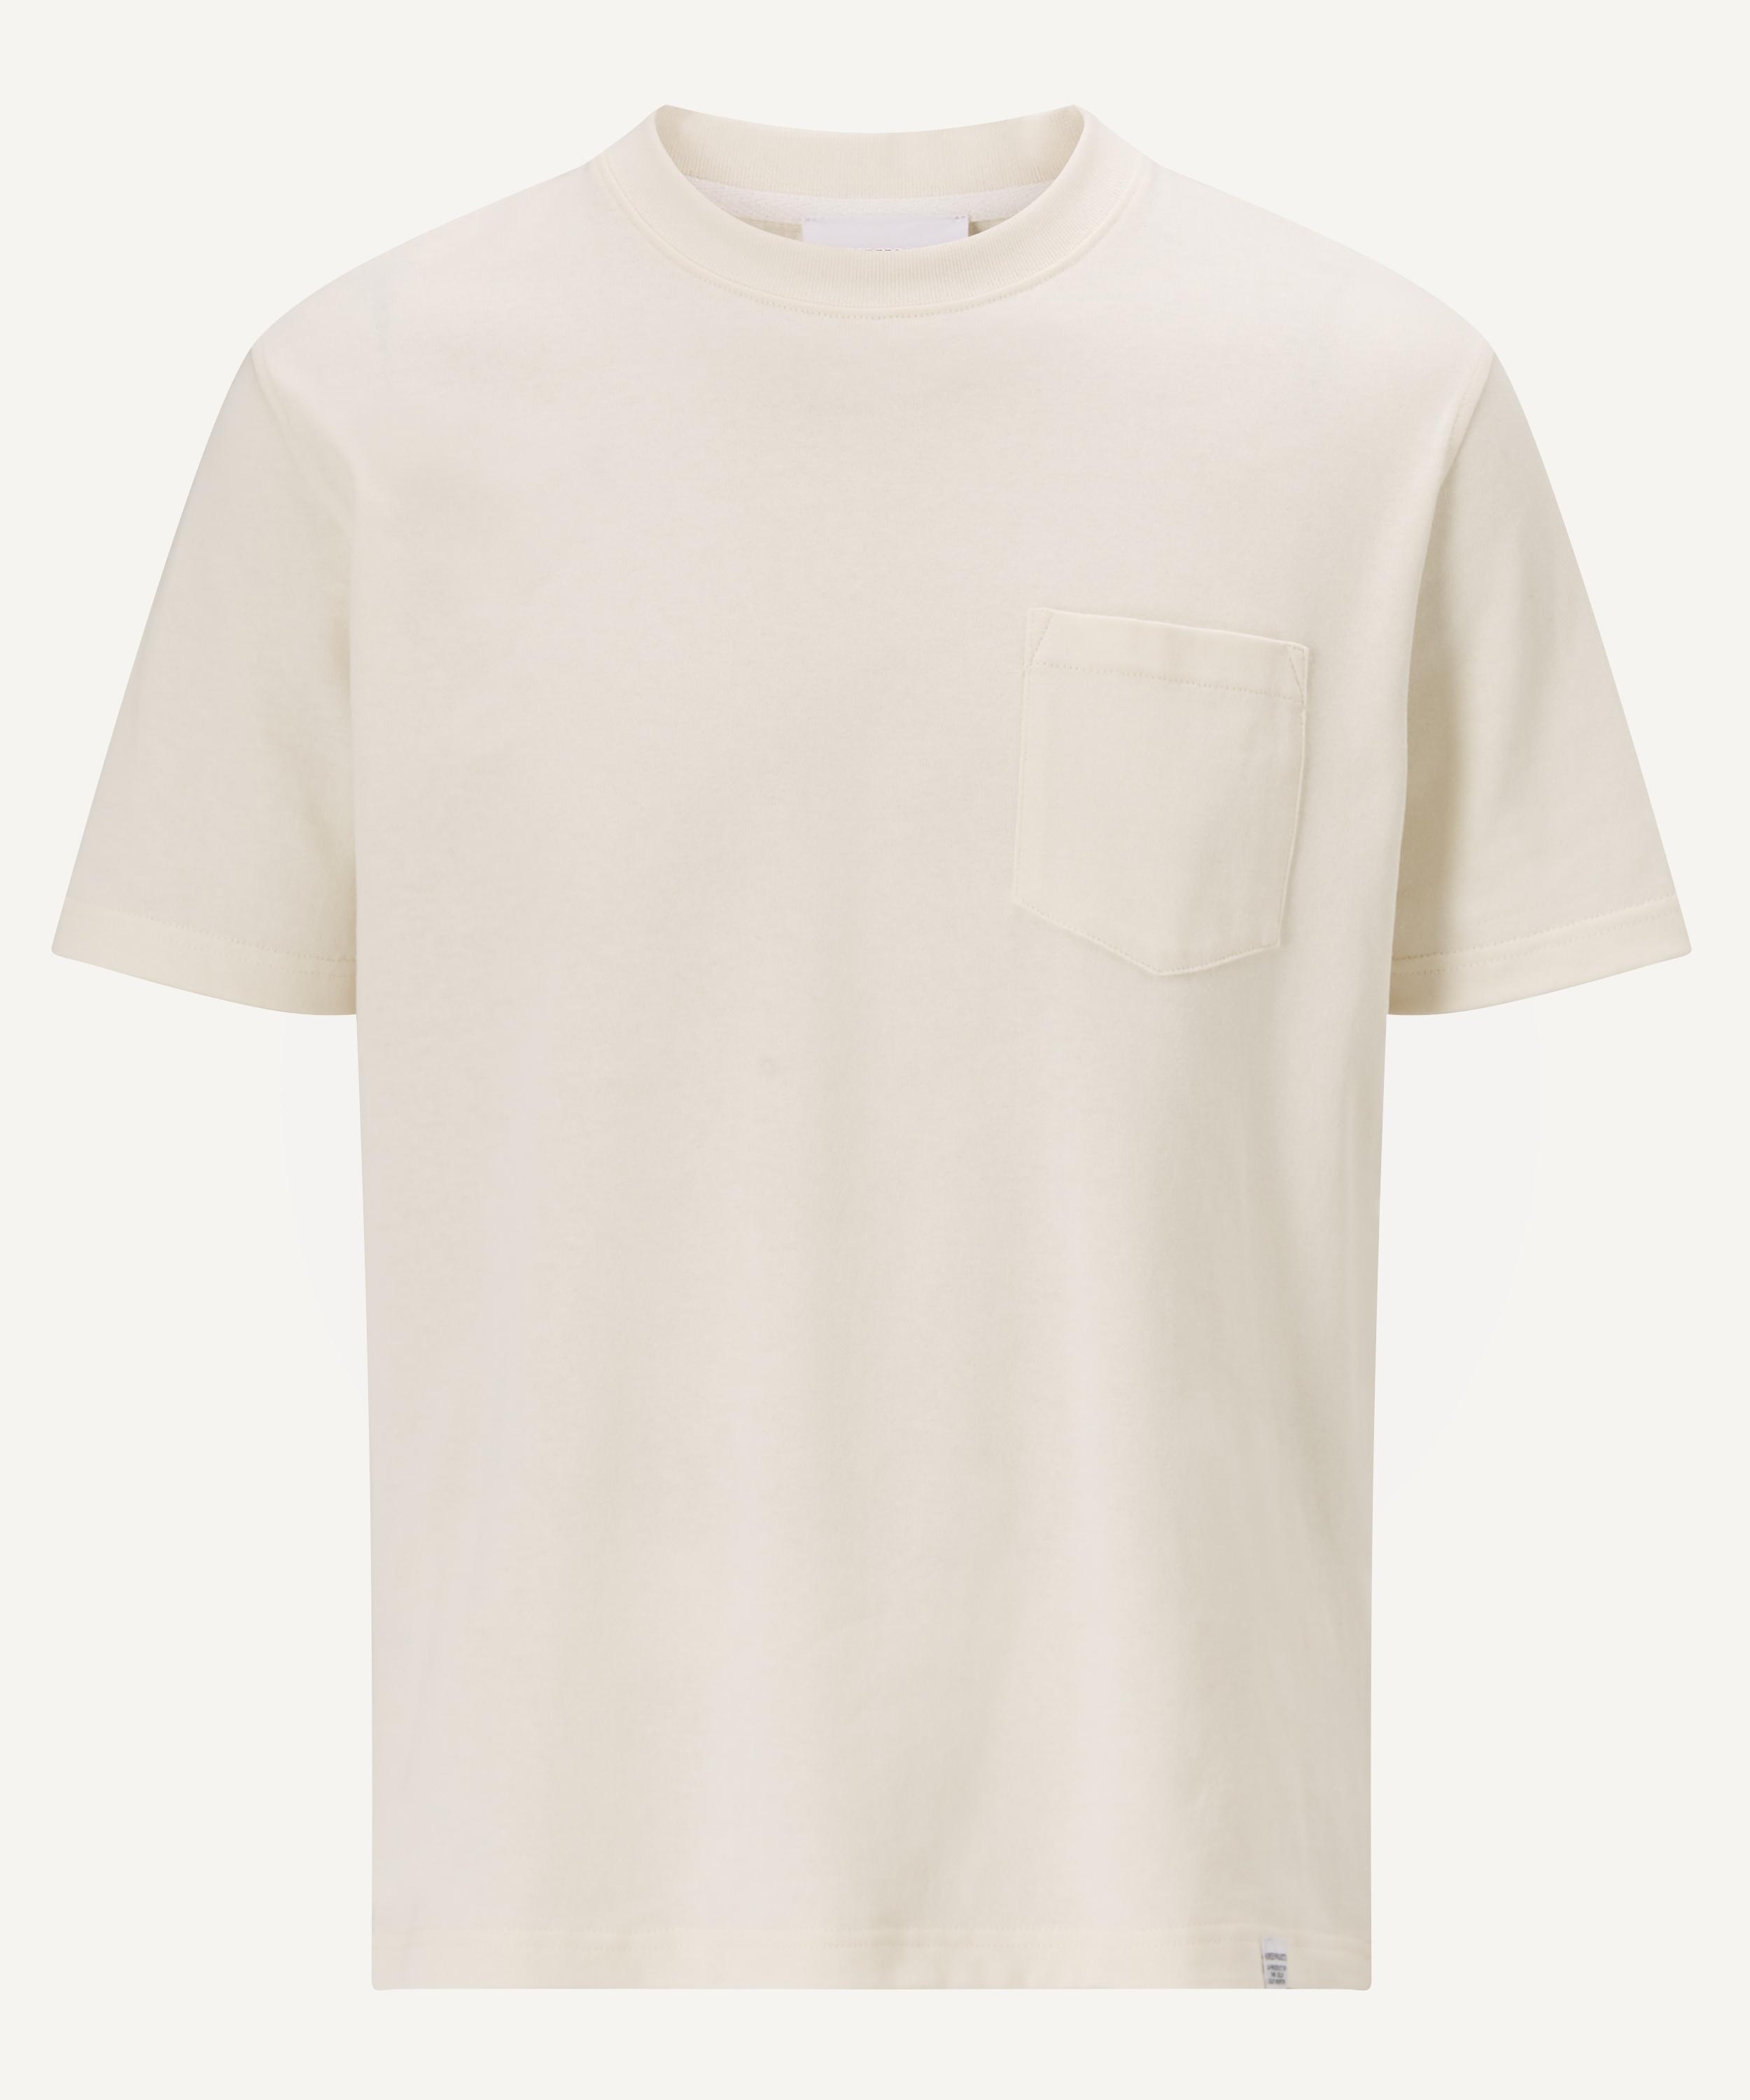 NORSE PROJECTS JOHANNES POCKET T-SHIRT,000626765